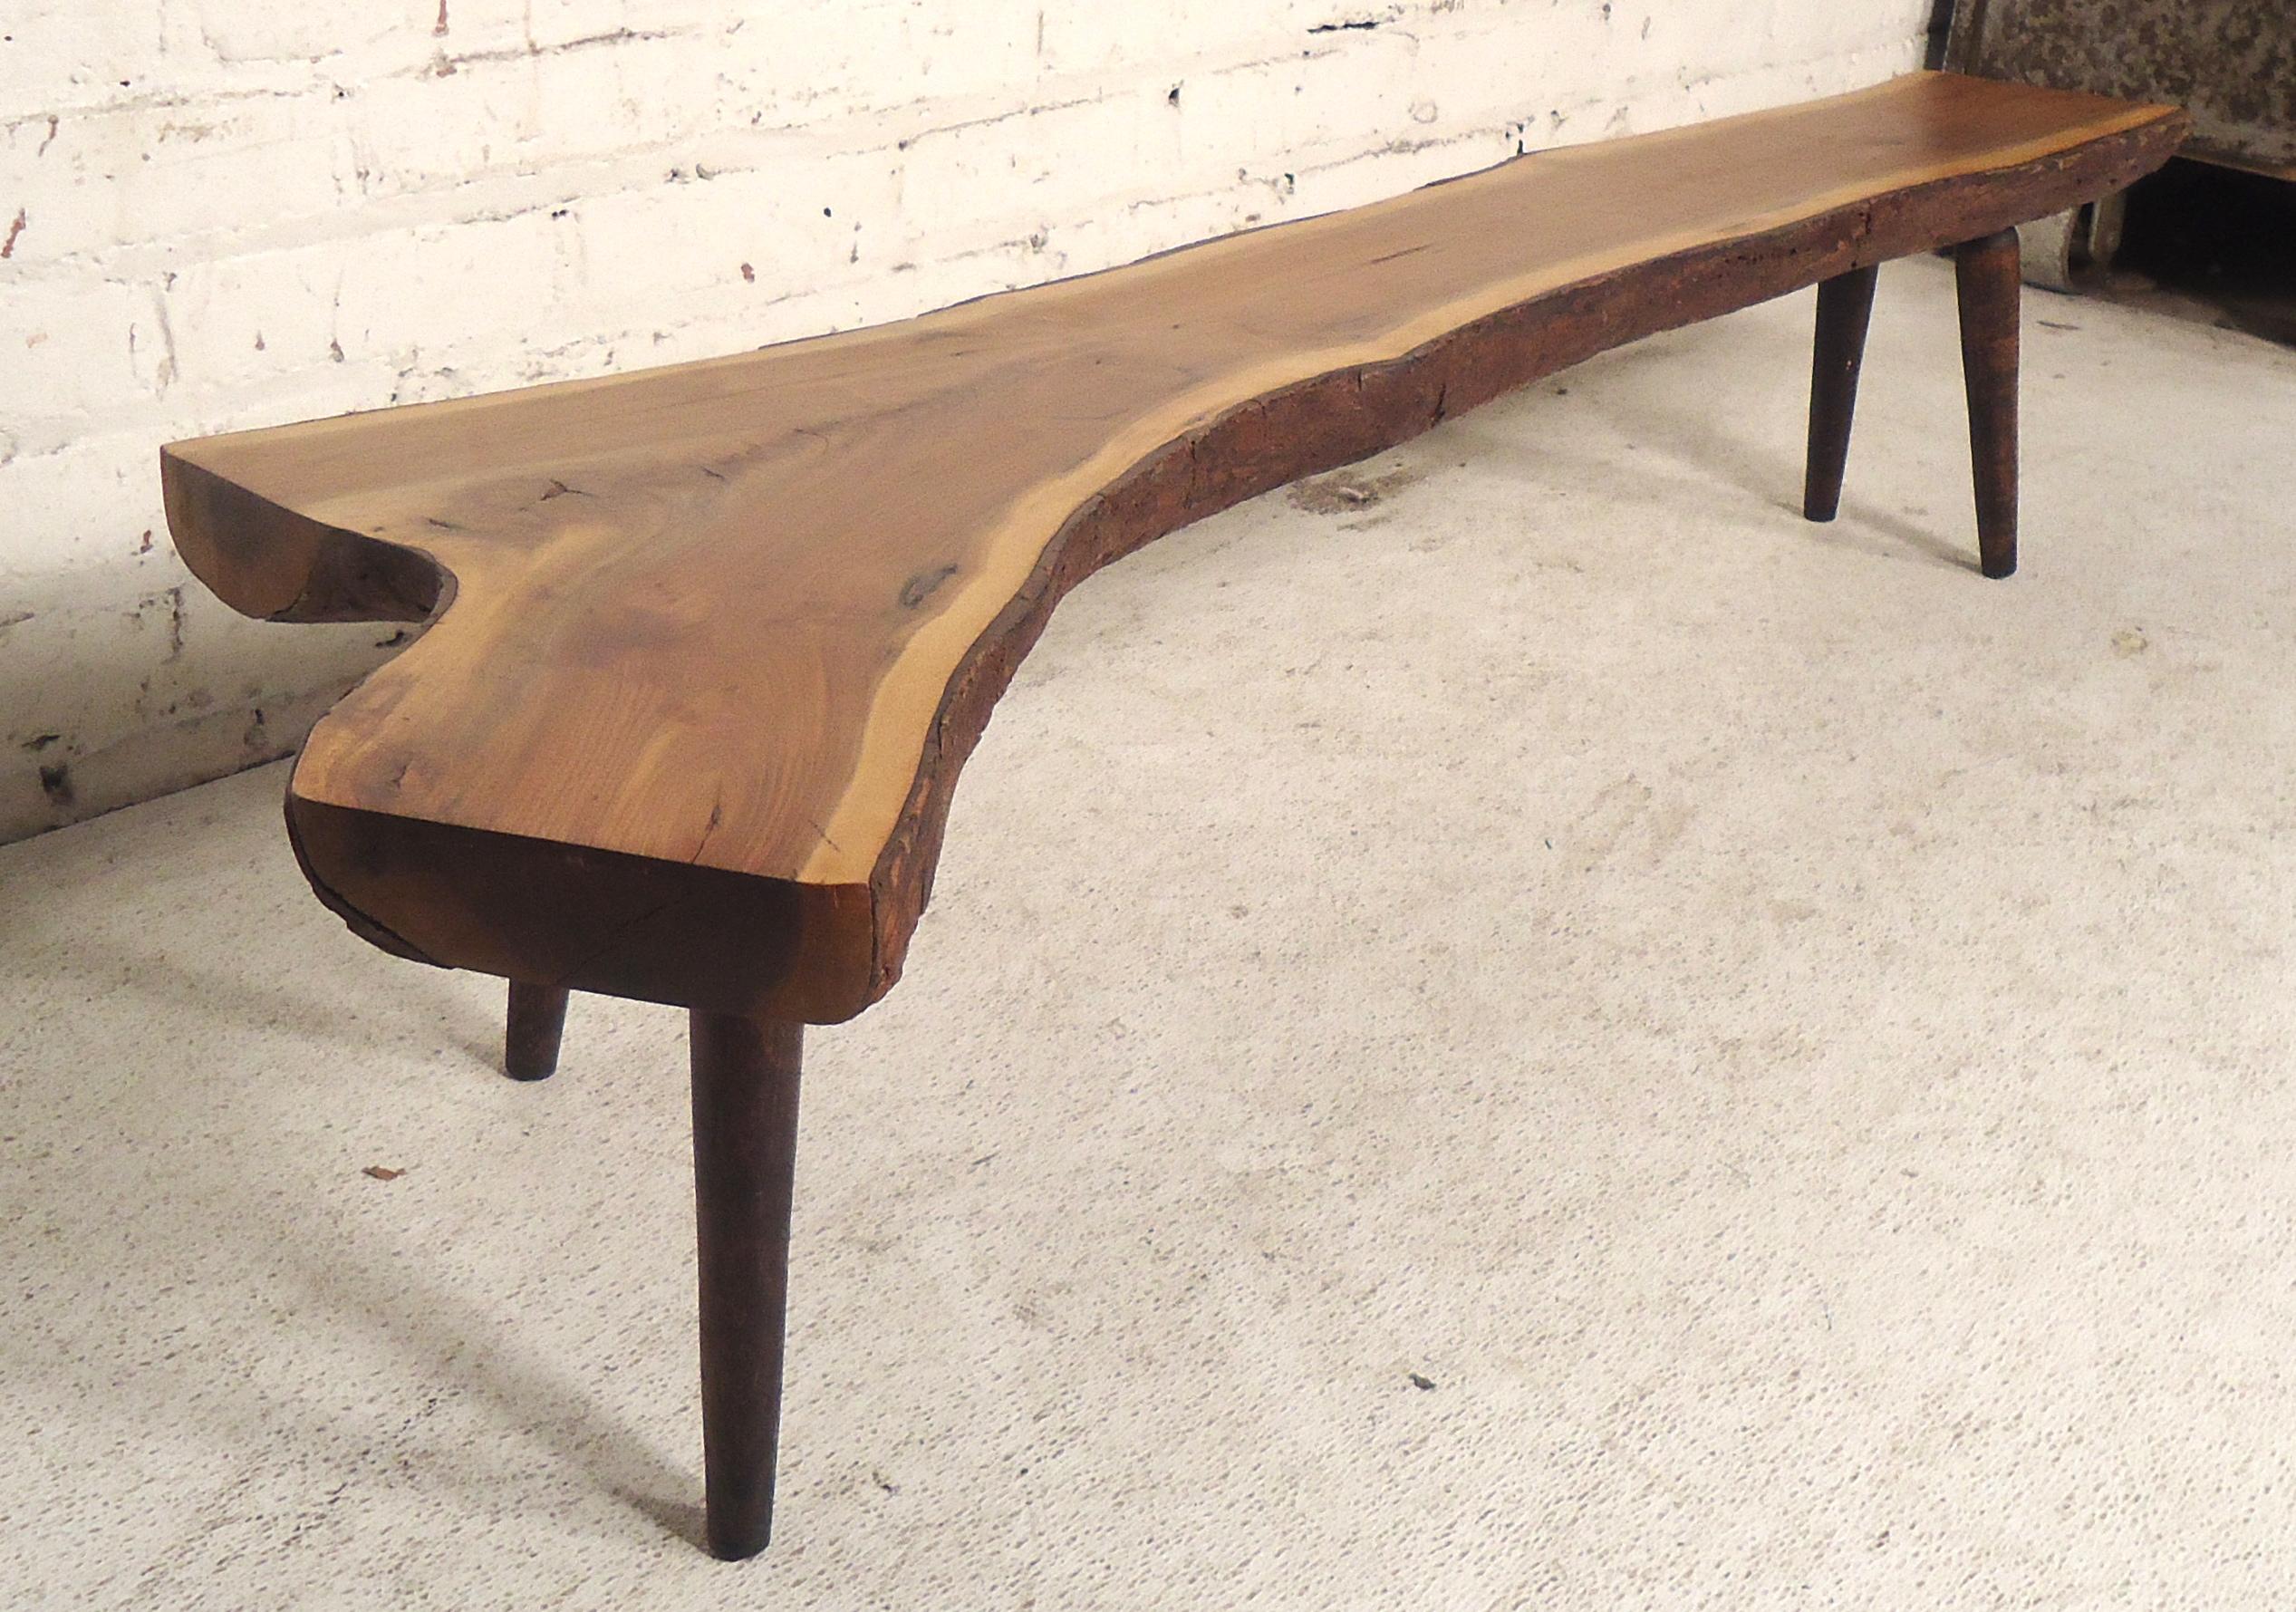 One of a kind live edge table/bench by Vermont artist Roy Sheldon. Sourced wood from his property and gifted with personal note and signature underneath.
(Please confirm item location - NY or NJ - with dealer).
 